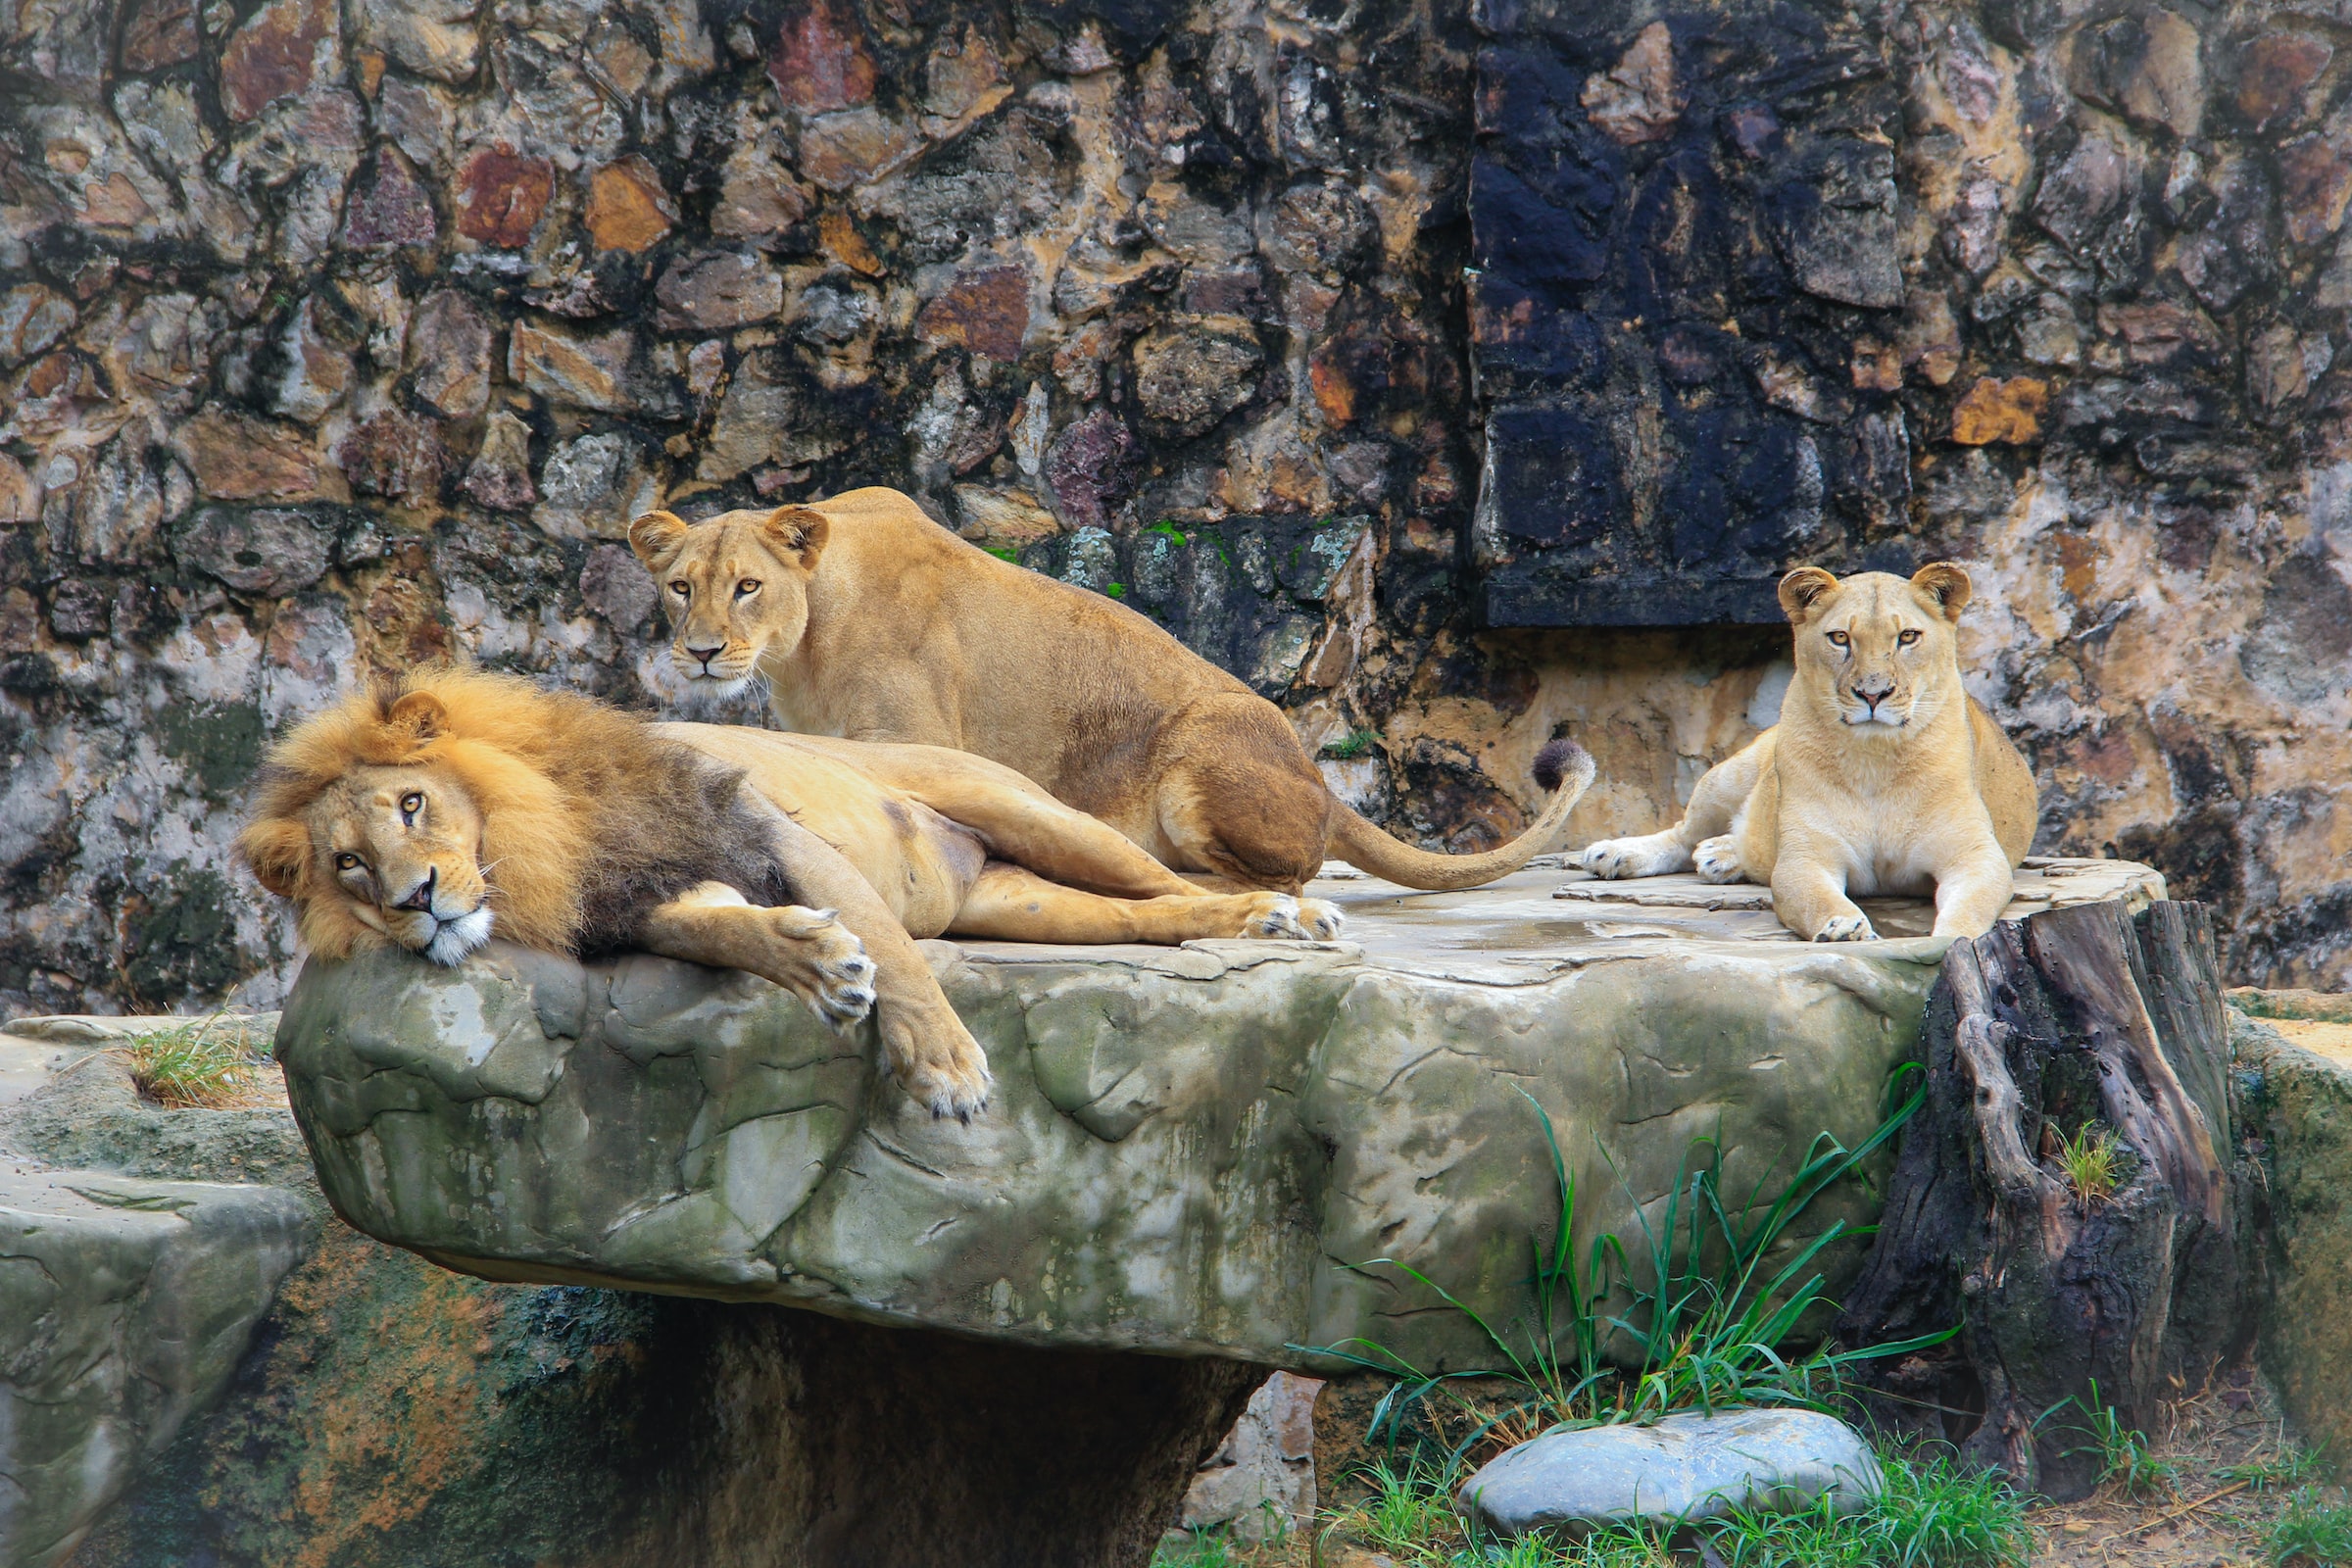 Lions in a zoo in Colombia